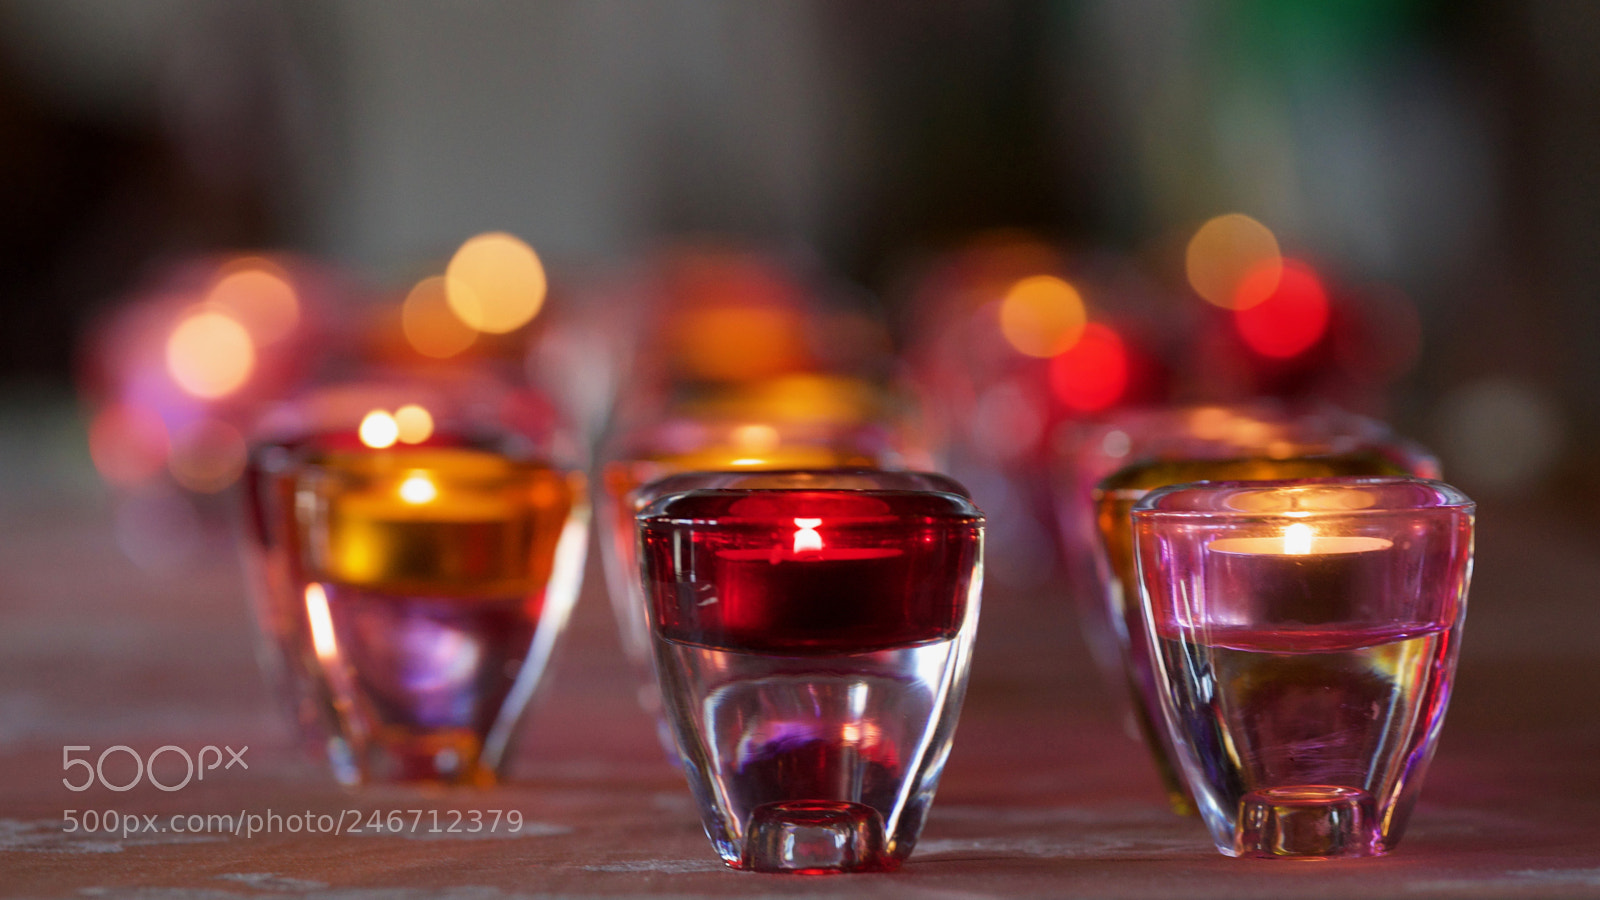 Sony a7 sample photo. Candles in bokeh photography